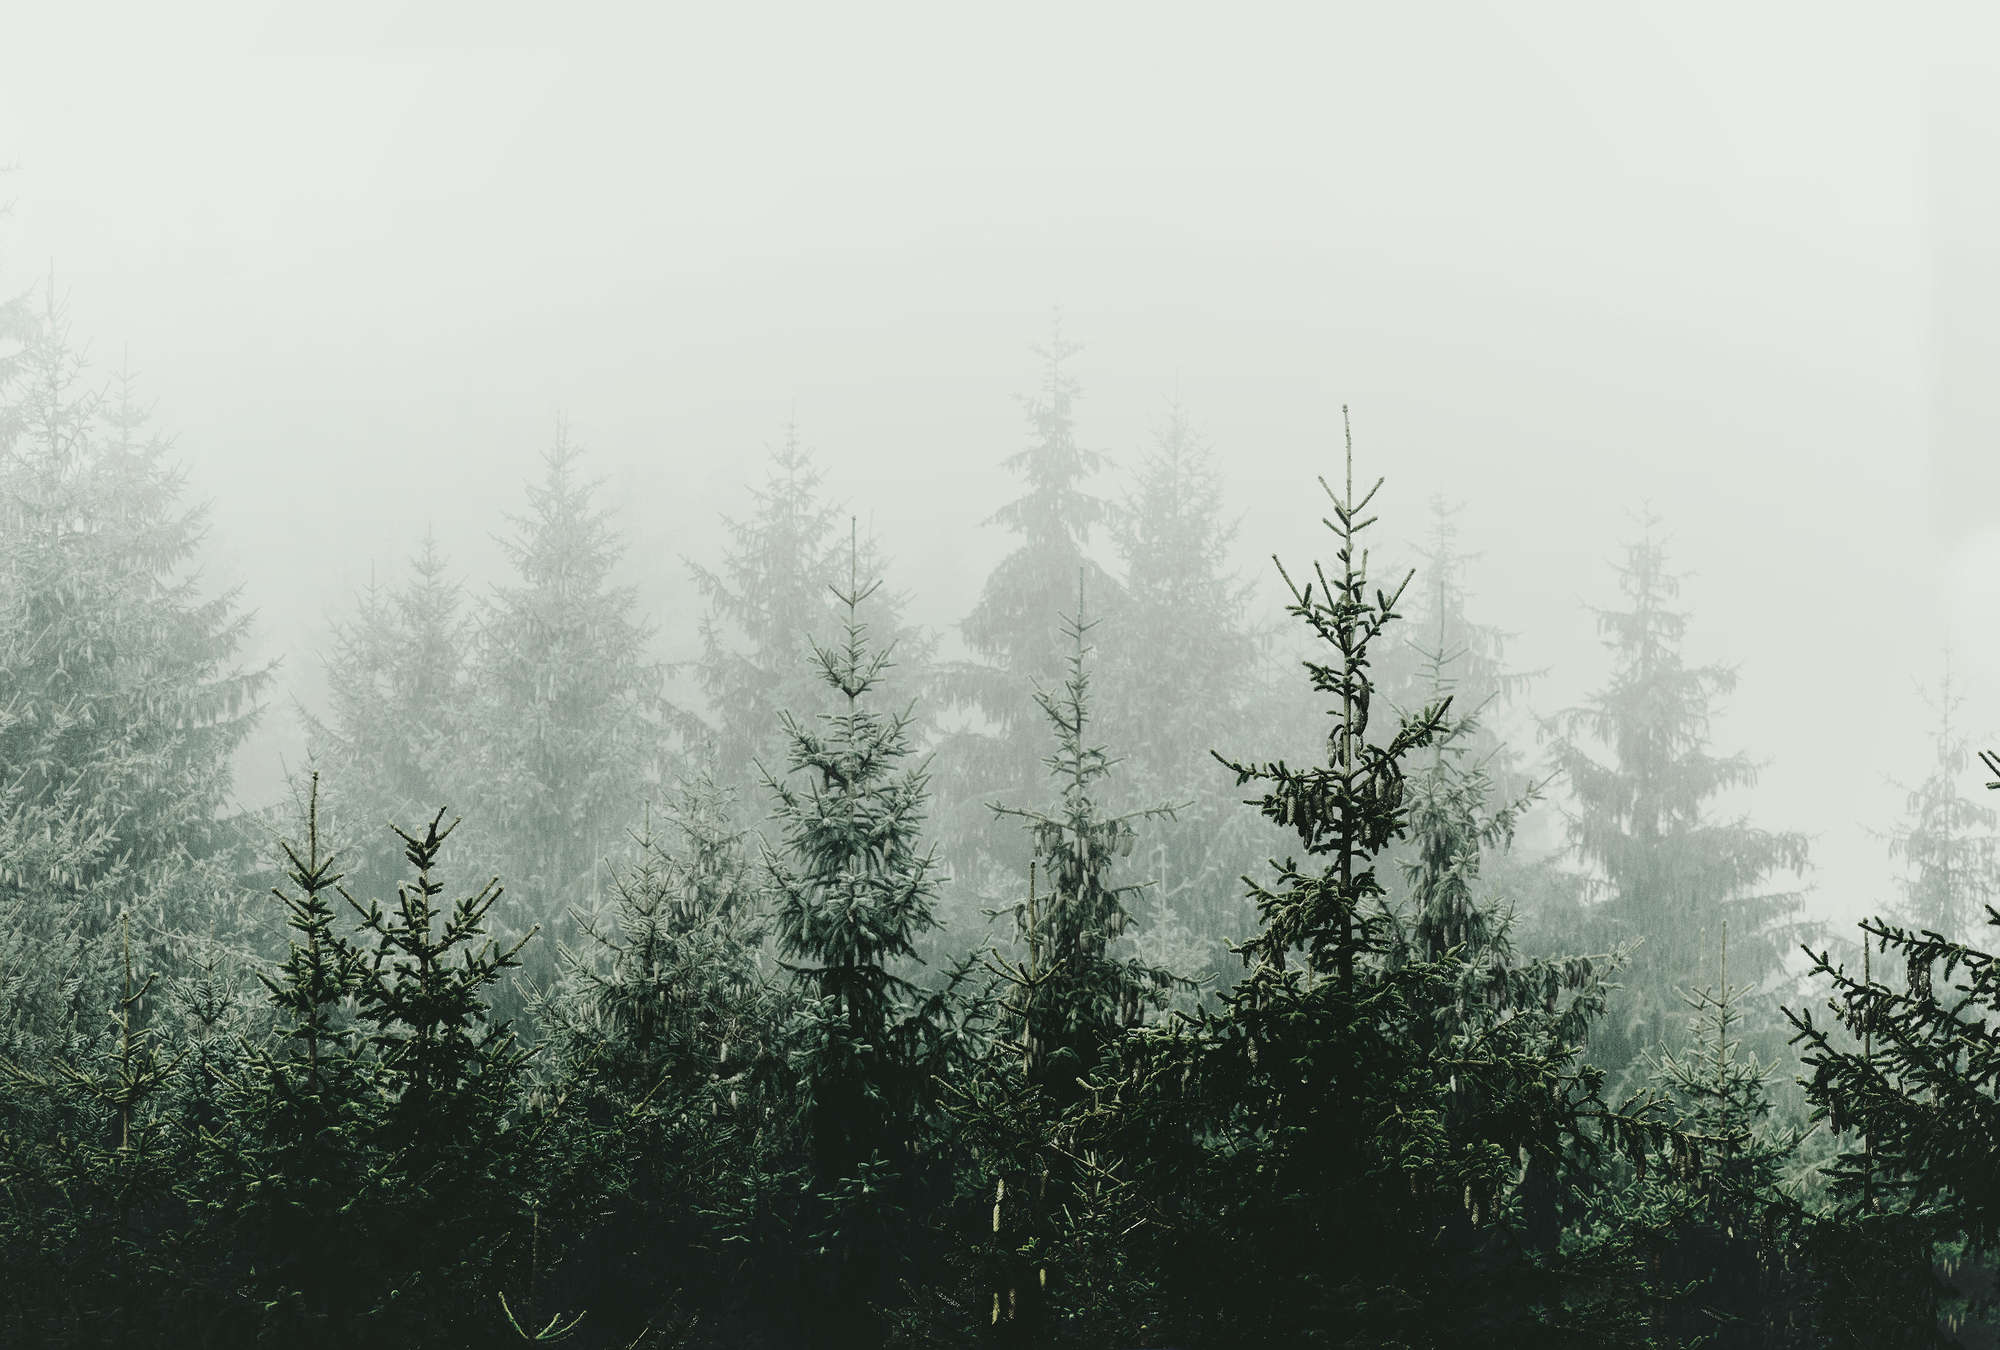             Photo wallpaper forest in the mist evergreen firs
        